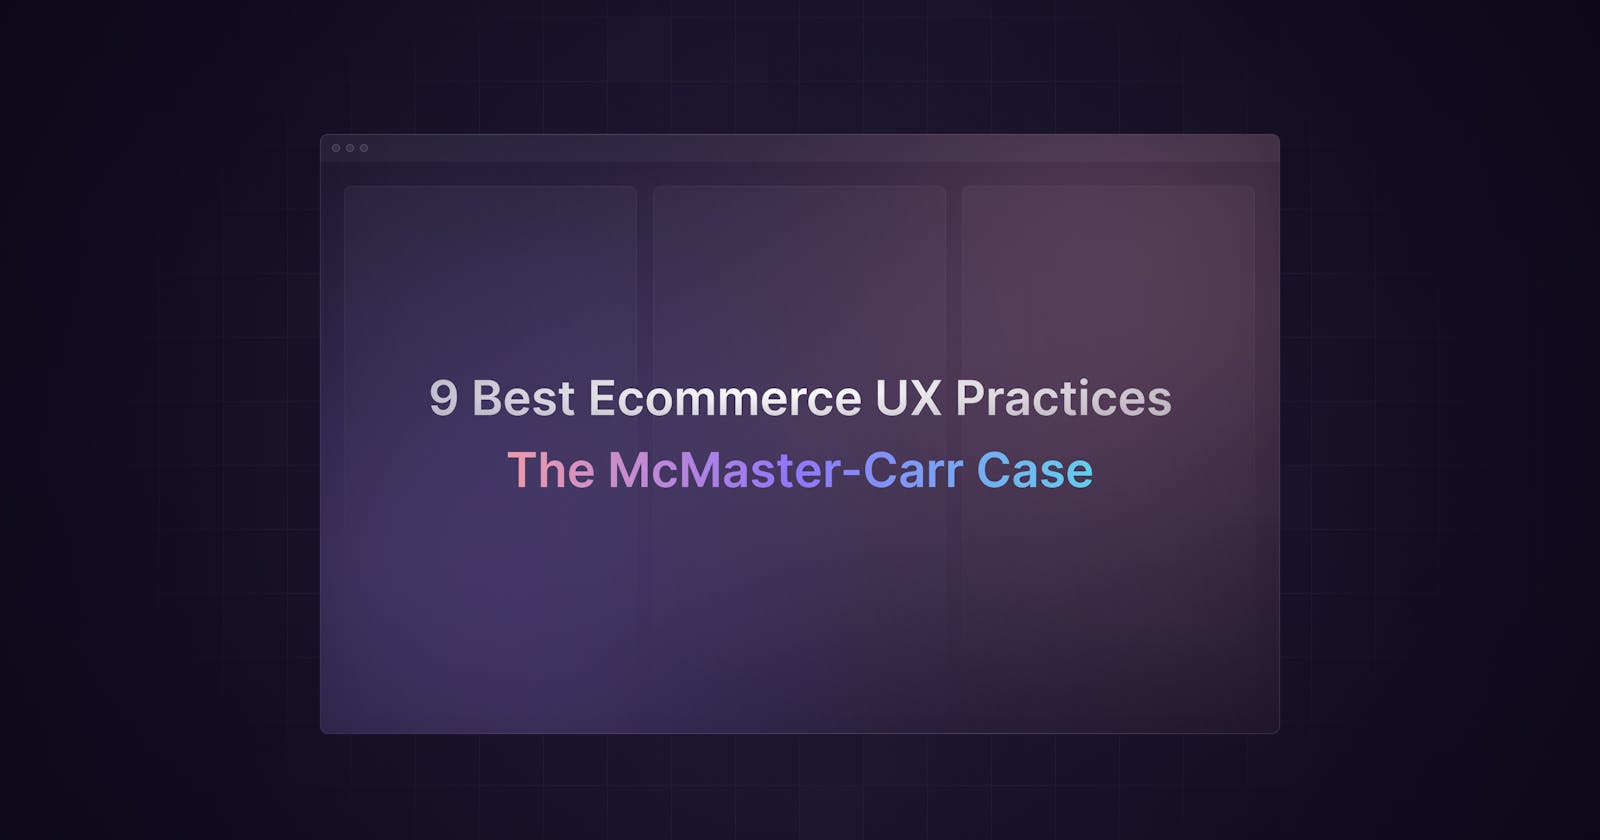 UX Learnings From the Best Ecommerce Site HN's Ever Seen